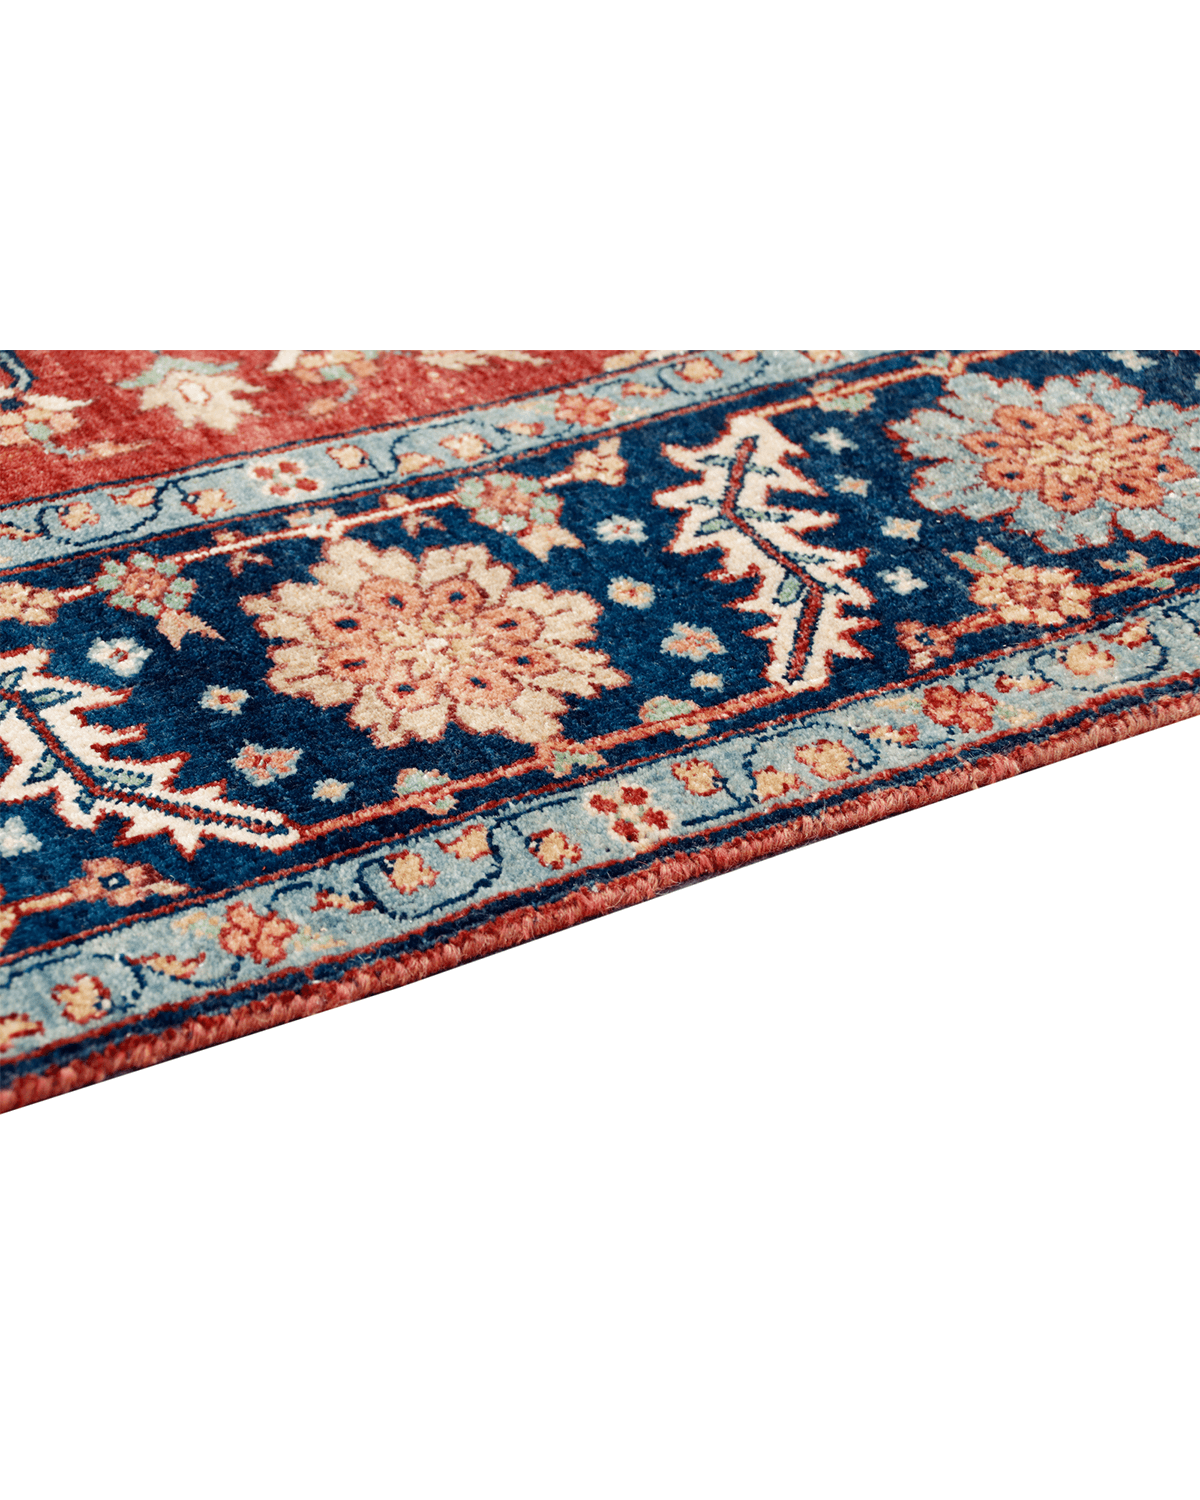 Hand-knotted Traditional Rug (JR-7)